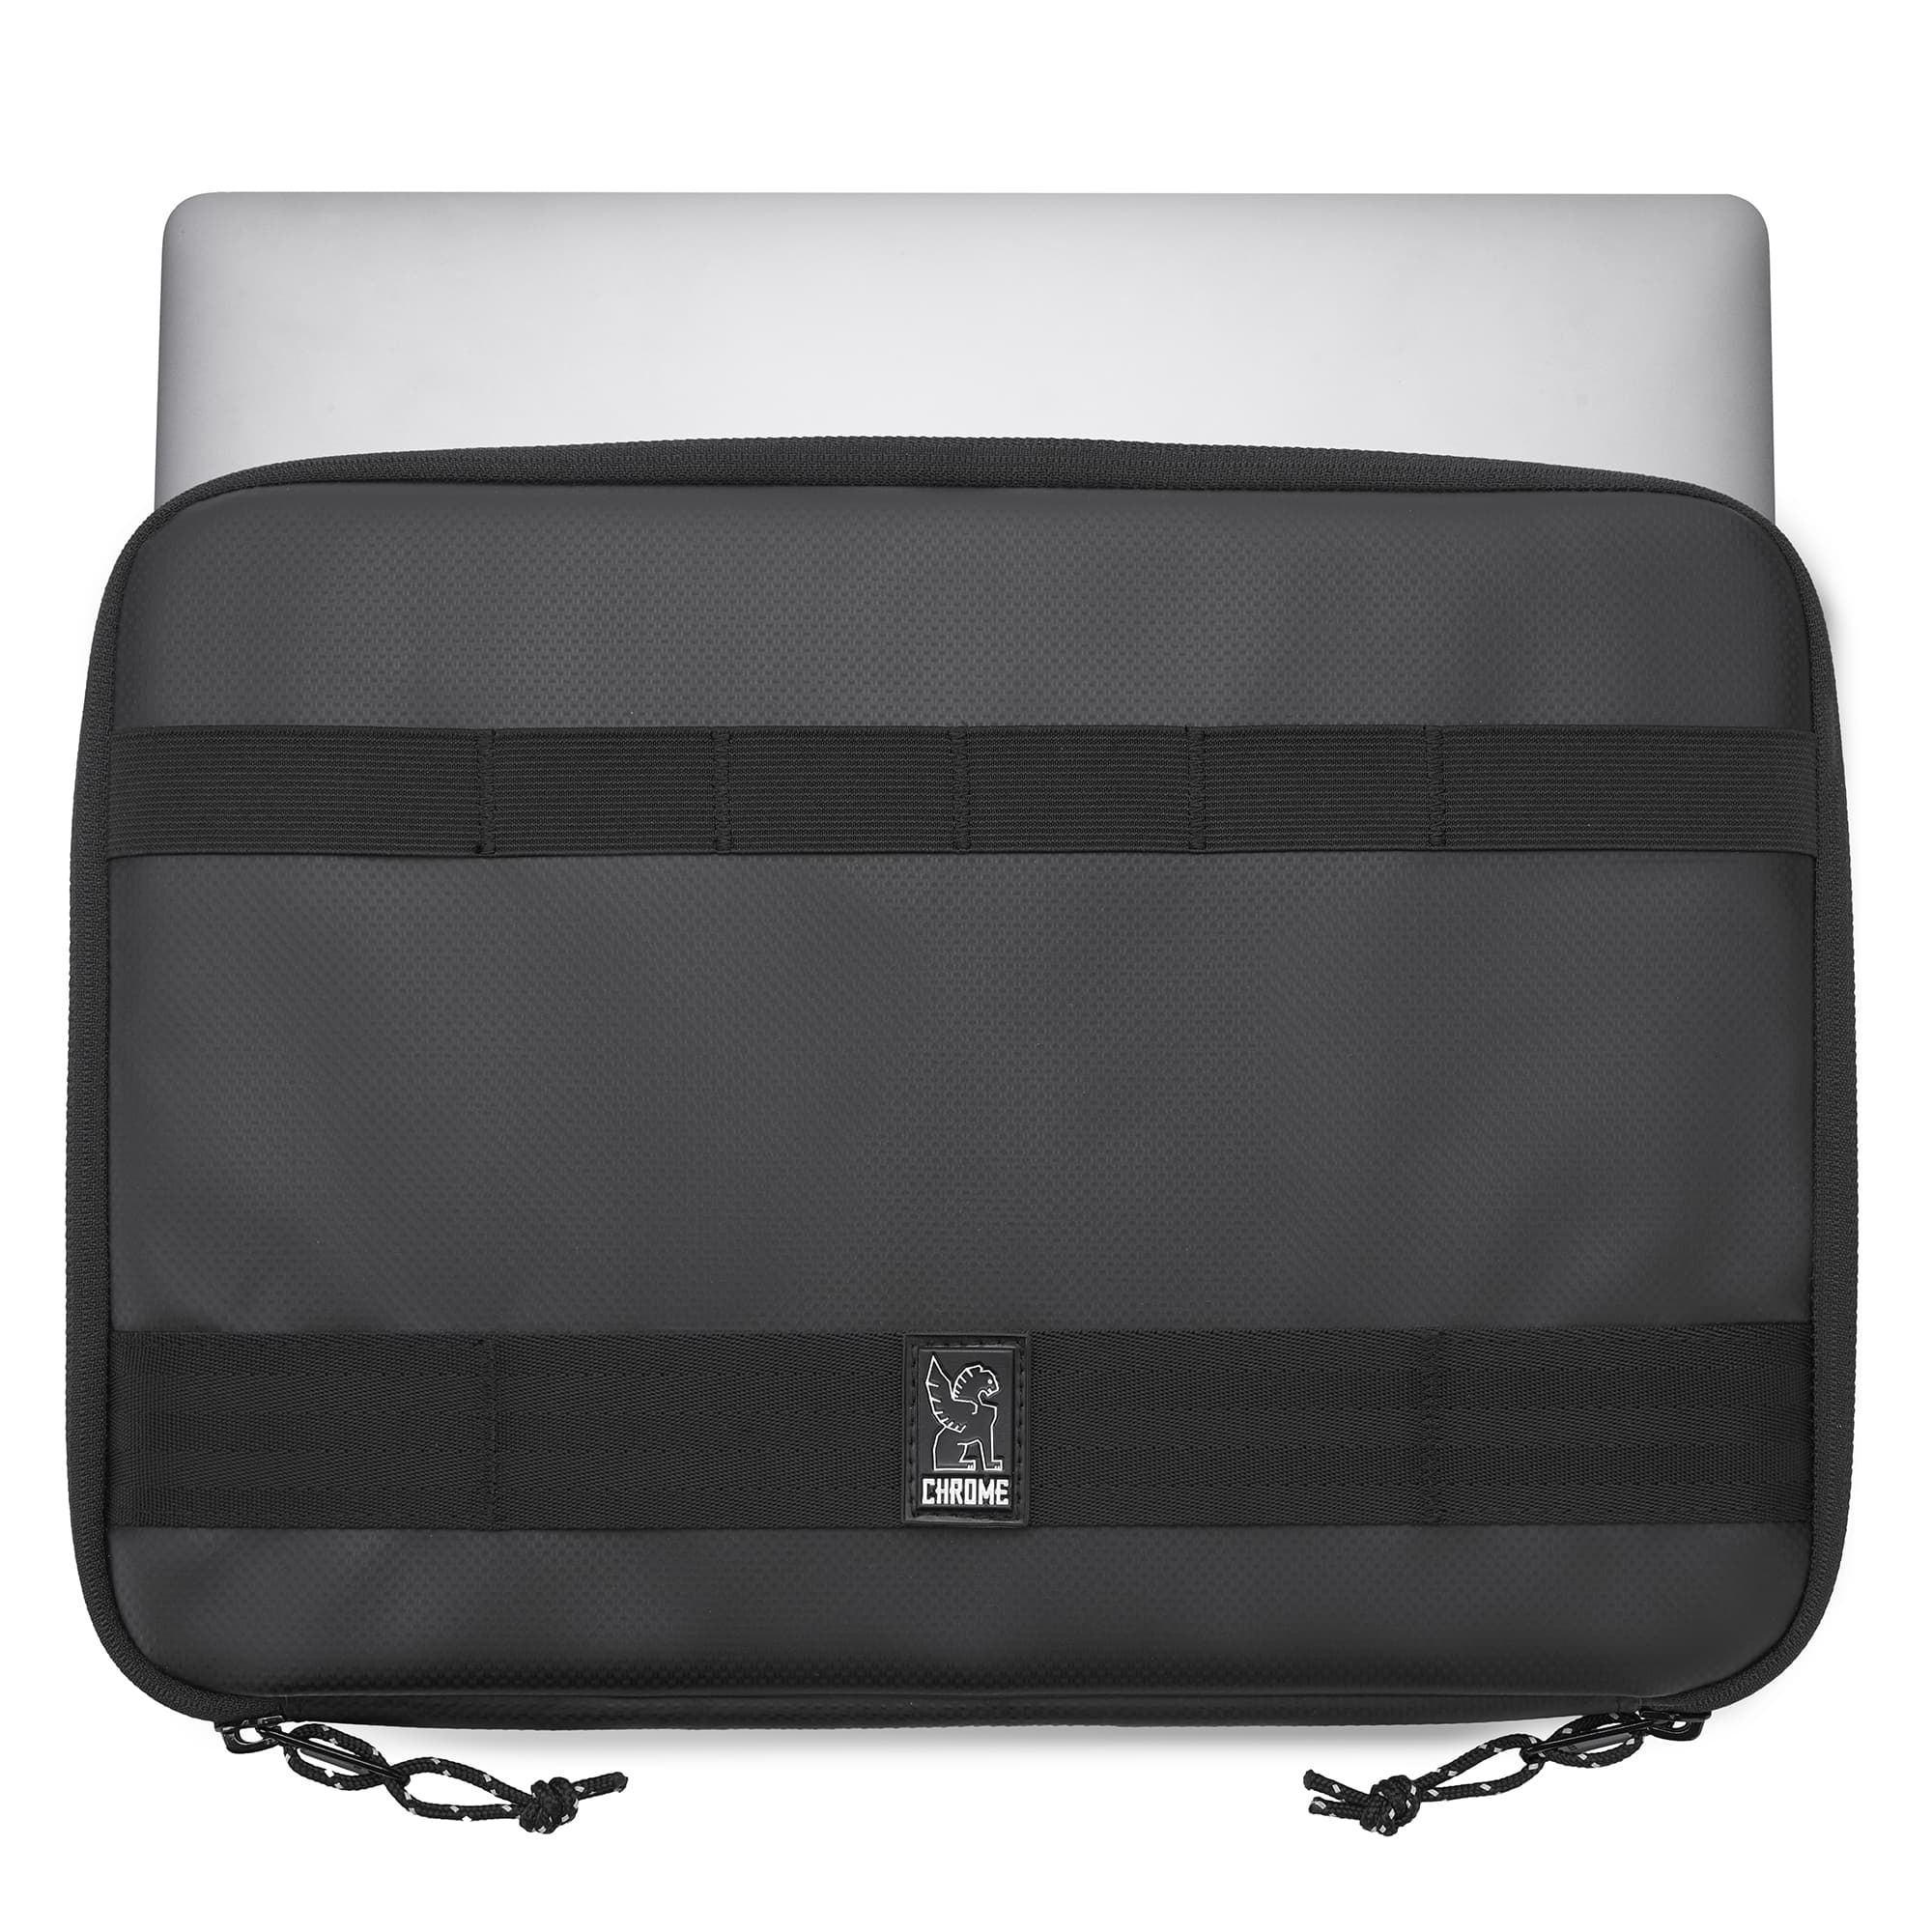 Padded laptop sleeve fits laptops 13 to 14 inches example of computer fit